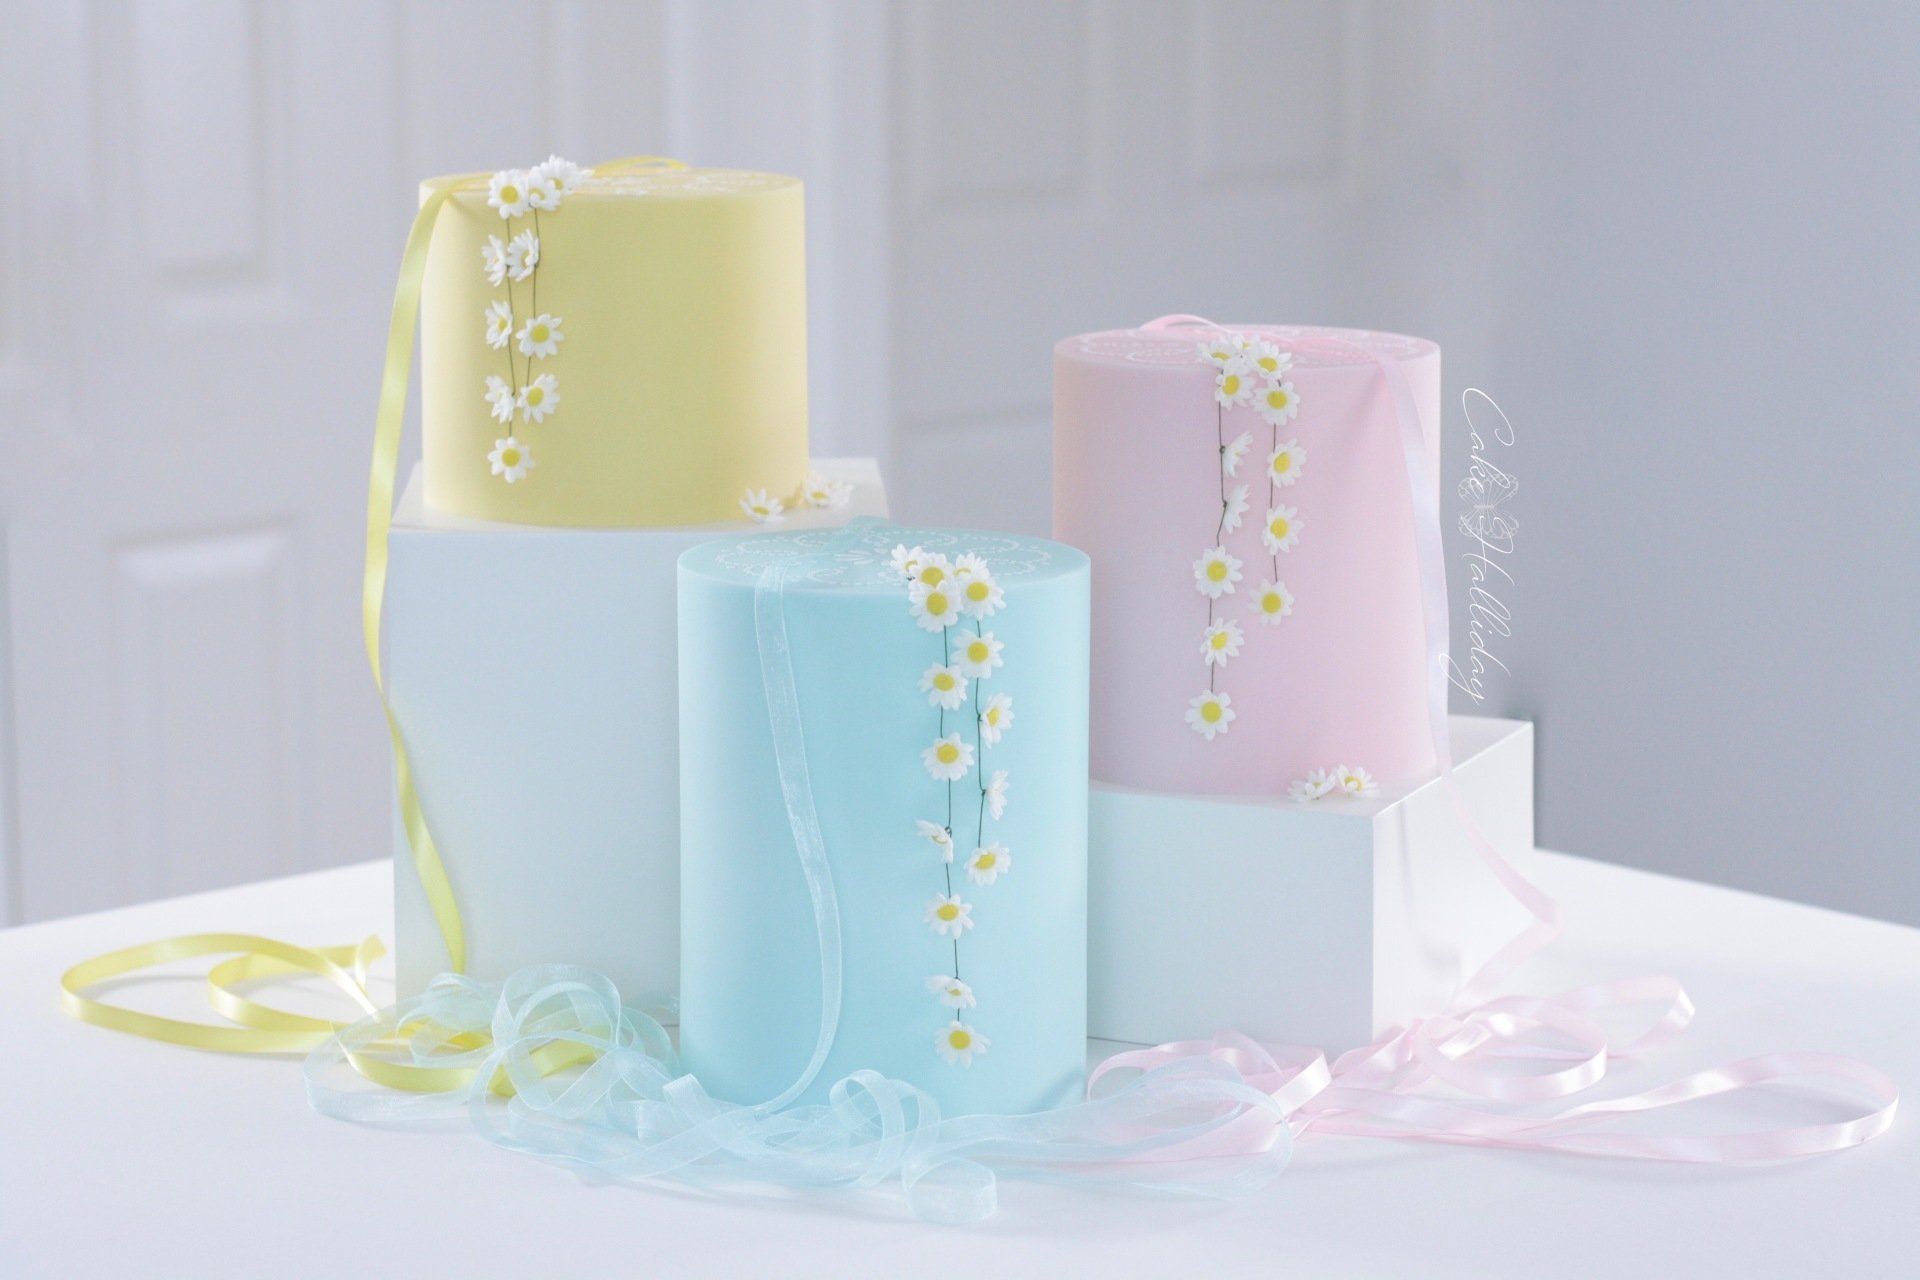 Single tier wedding cakes in pastel shades with daisy chains